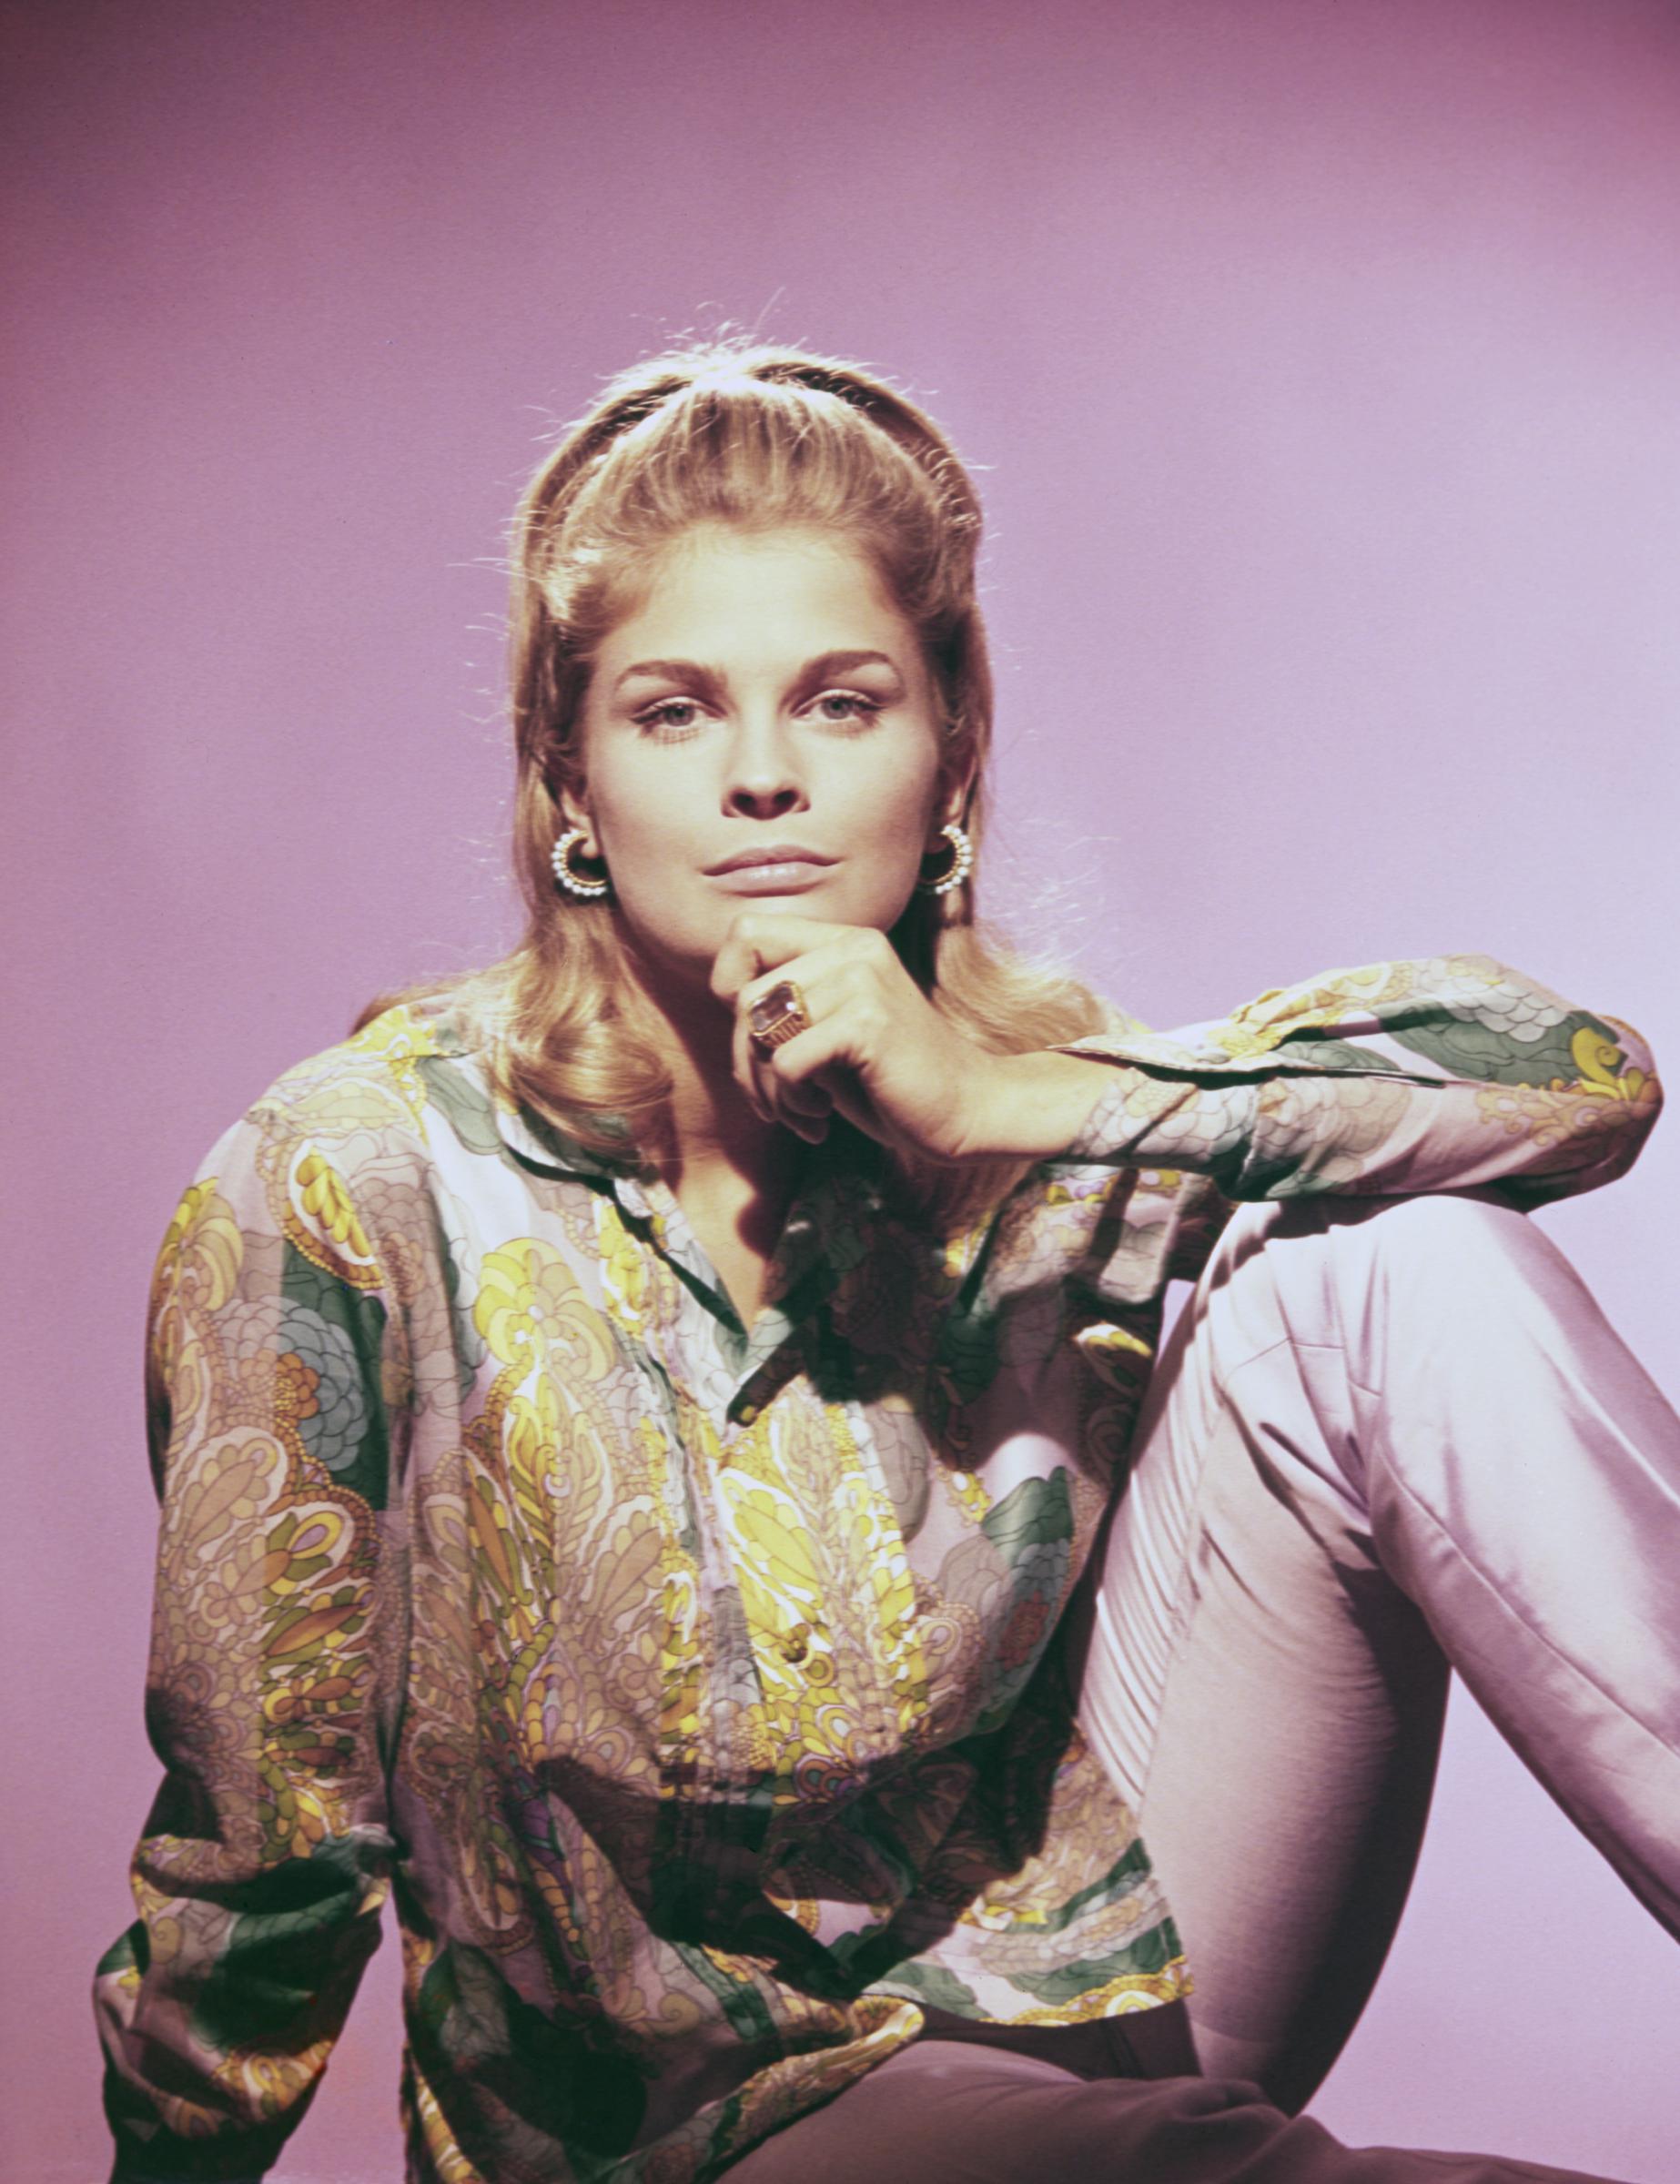 American actress and model Candice Bergen poses with her hand on her chin, circa 1967 | Source: Getty Images